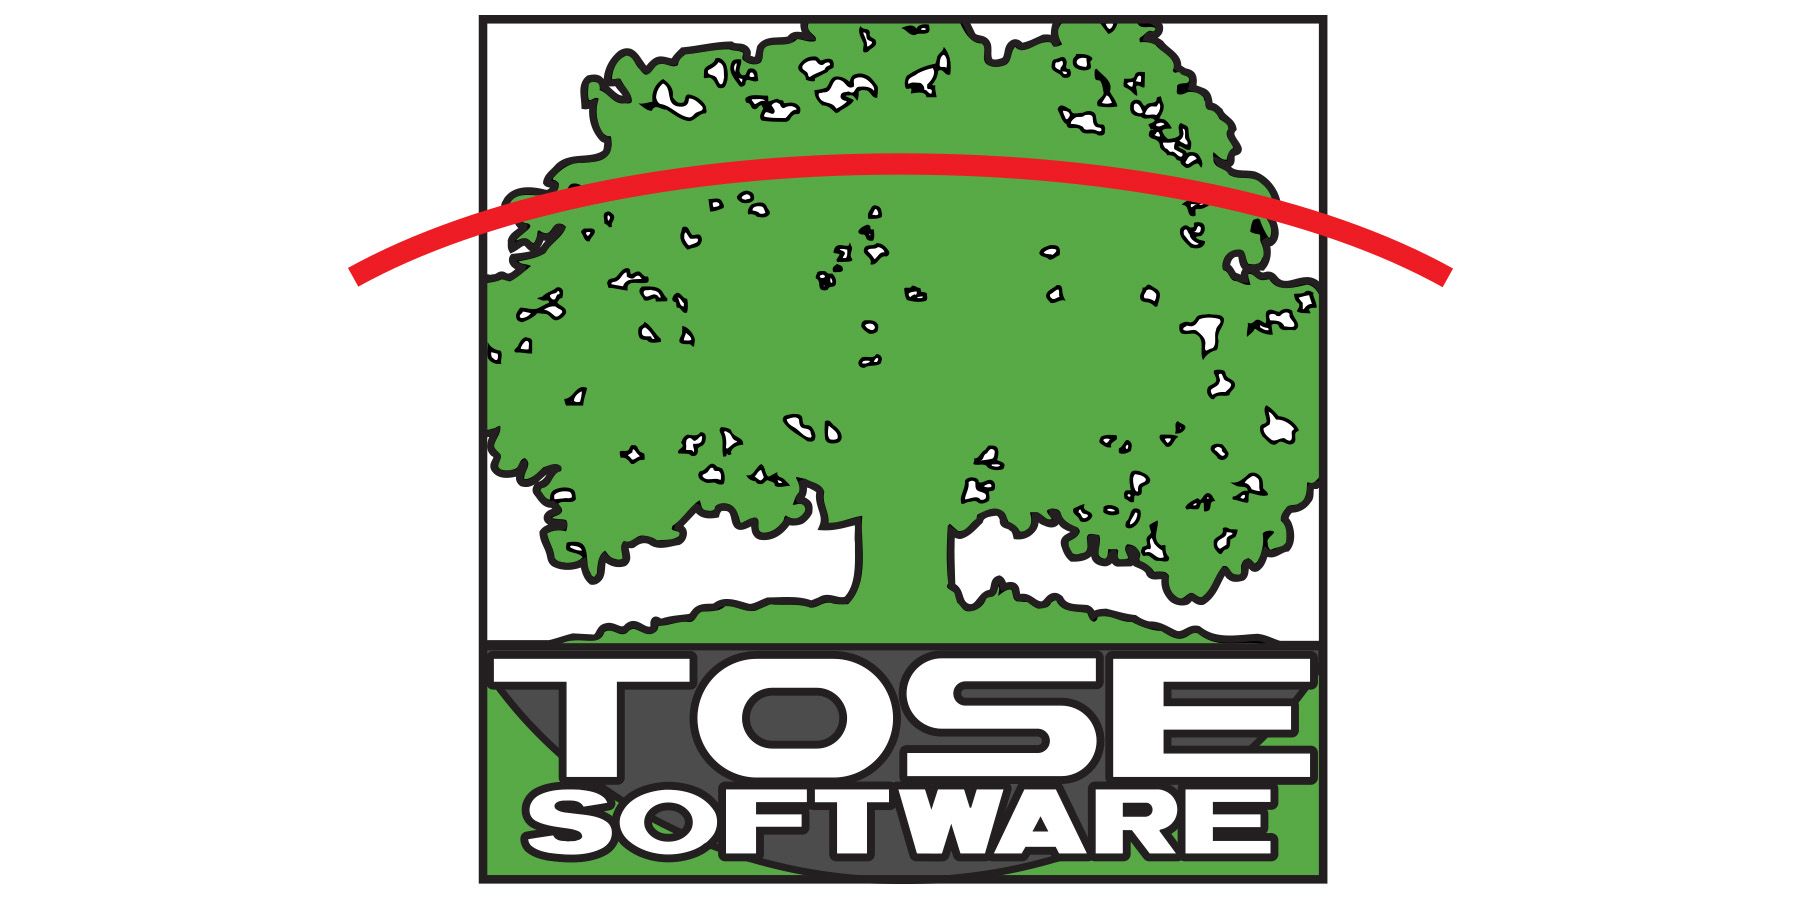 Tose Software logo on white background